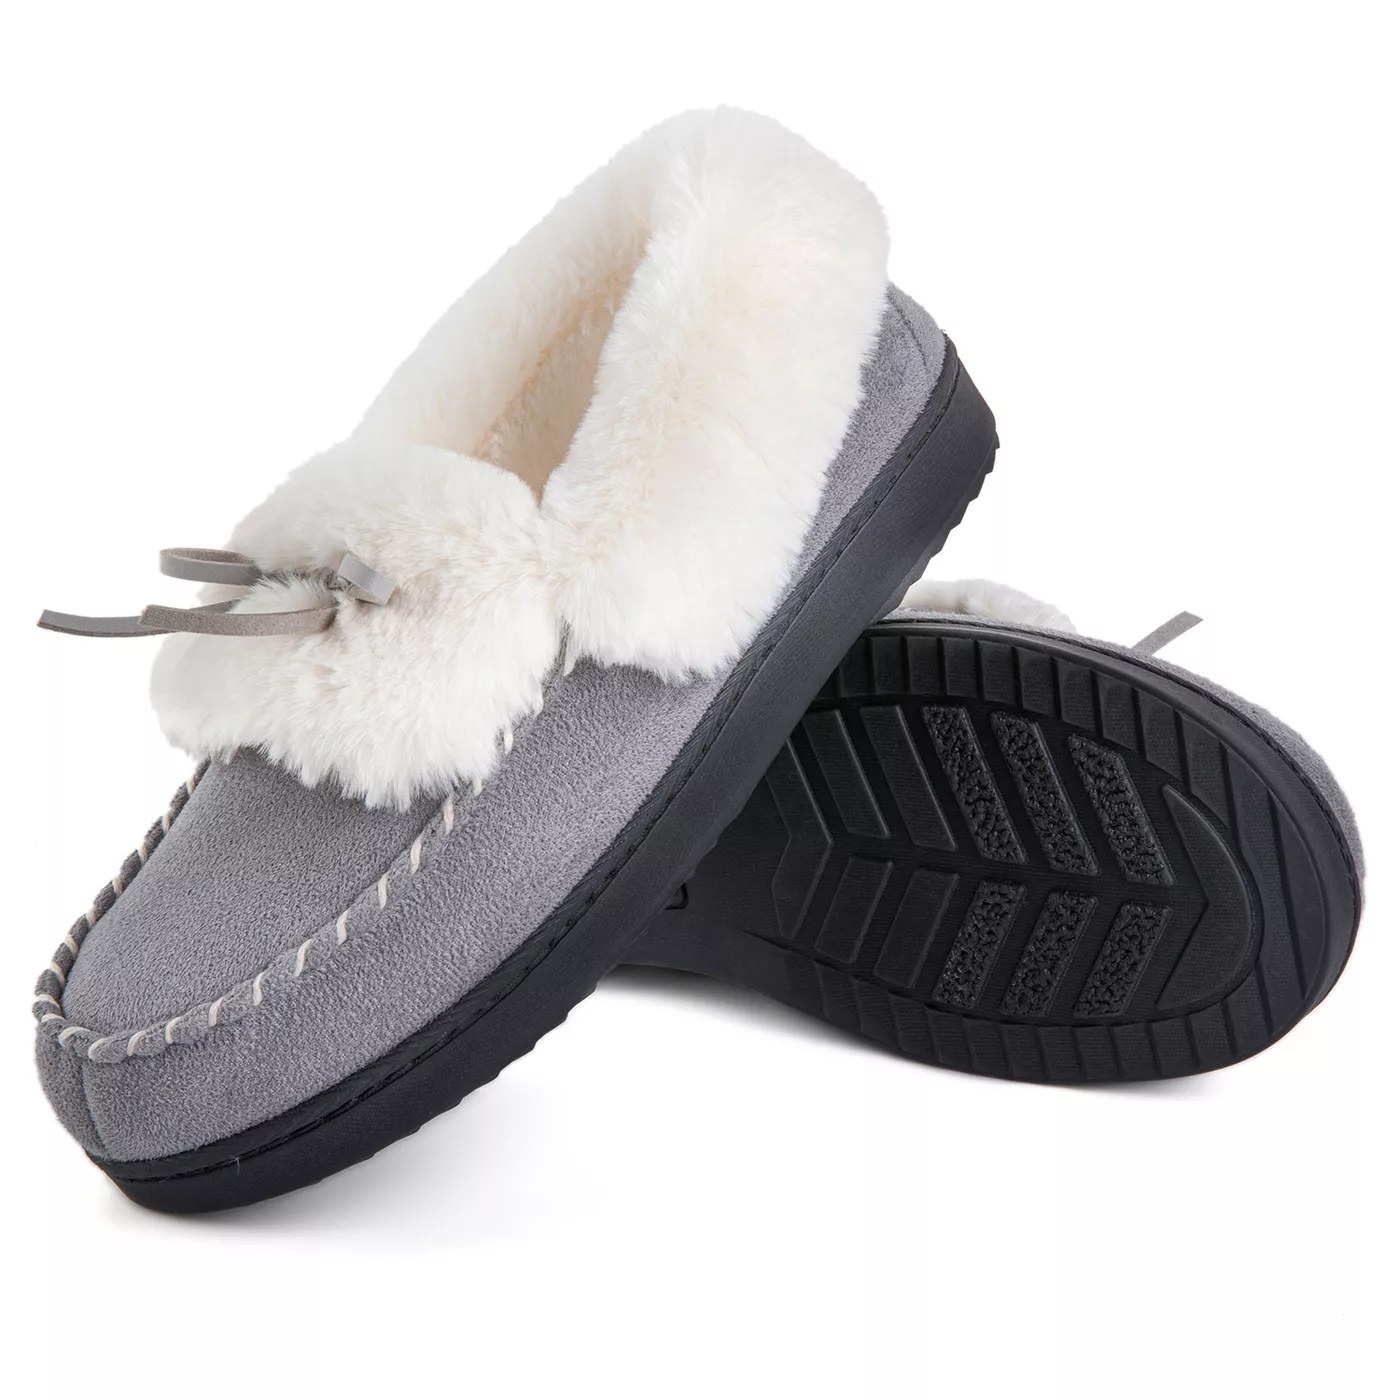 The gray and white slippers